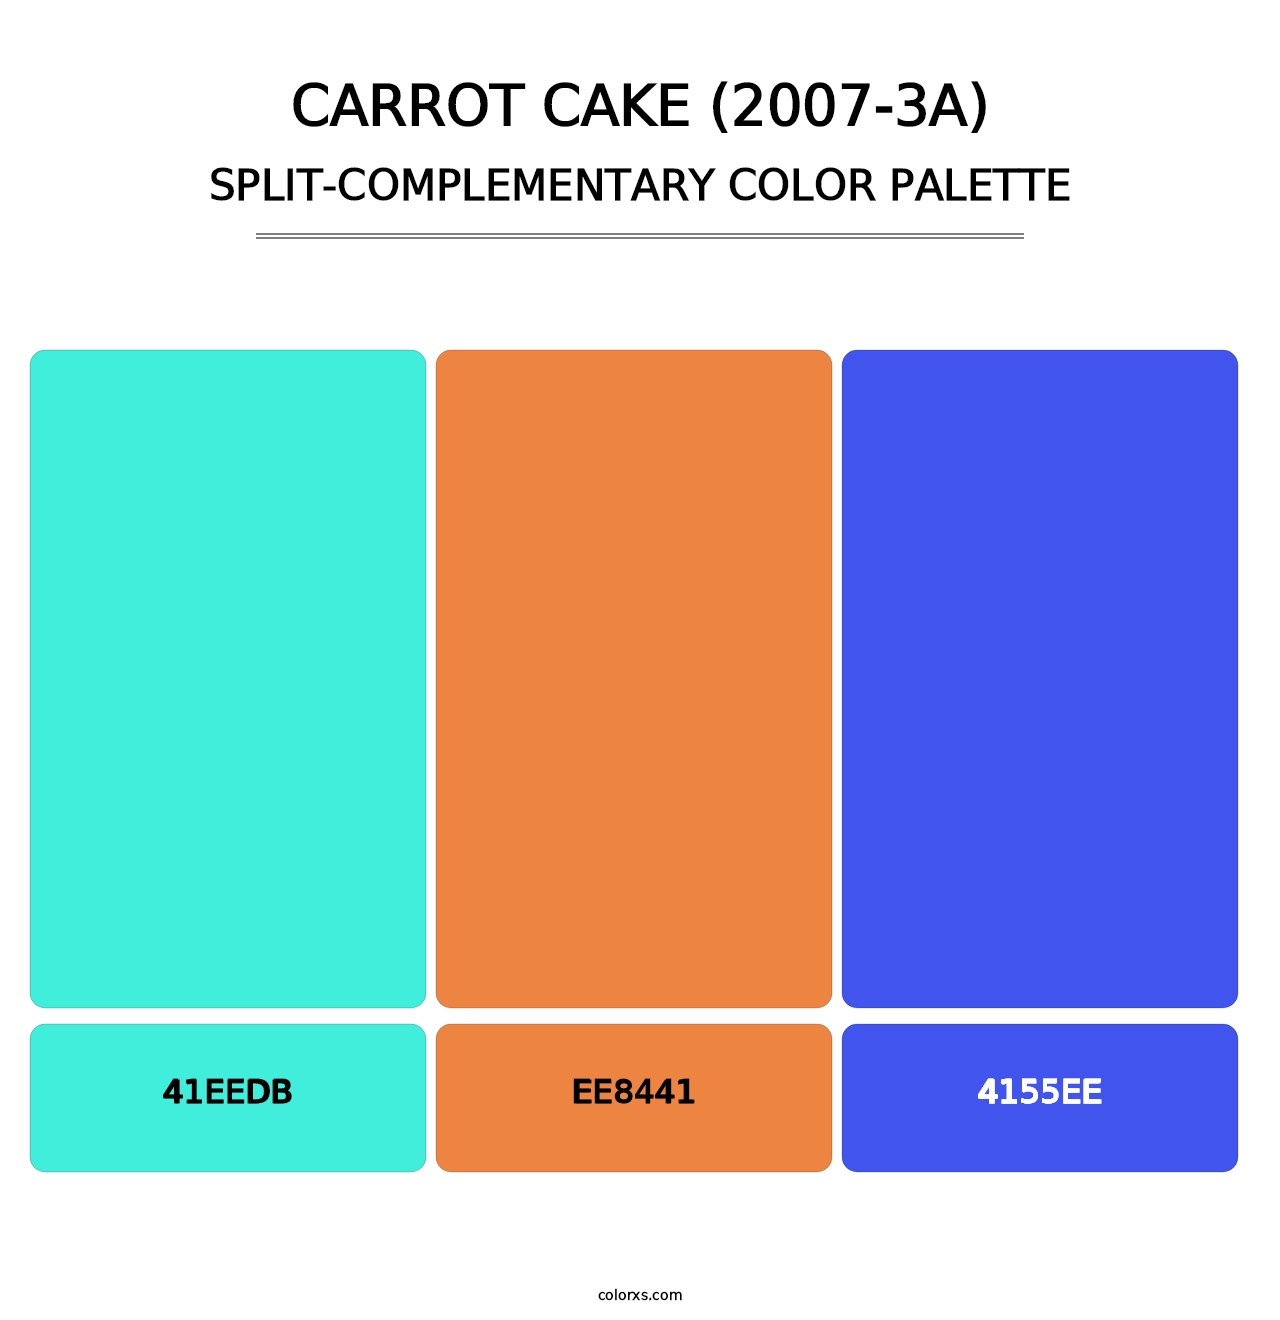 Carrot Cake (2007-3A) - Split-Complementary Color Palette